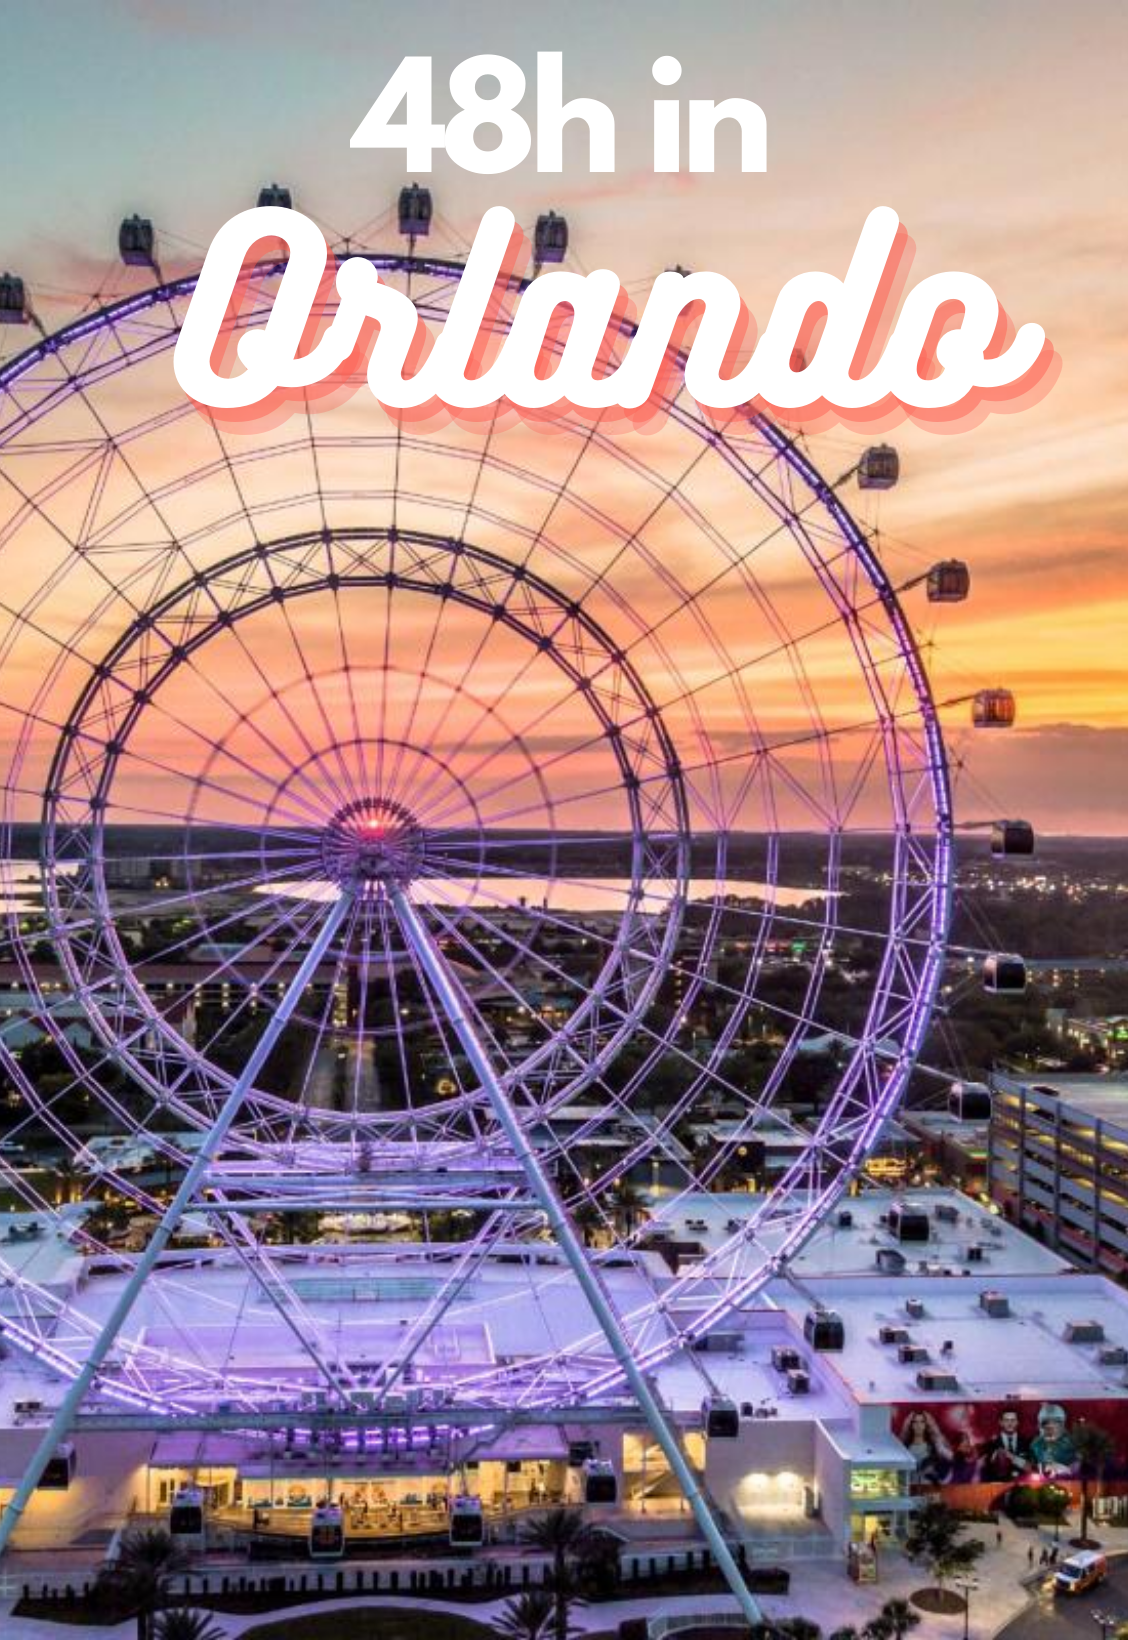 How To Spend 48h in Orlando